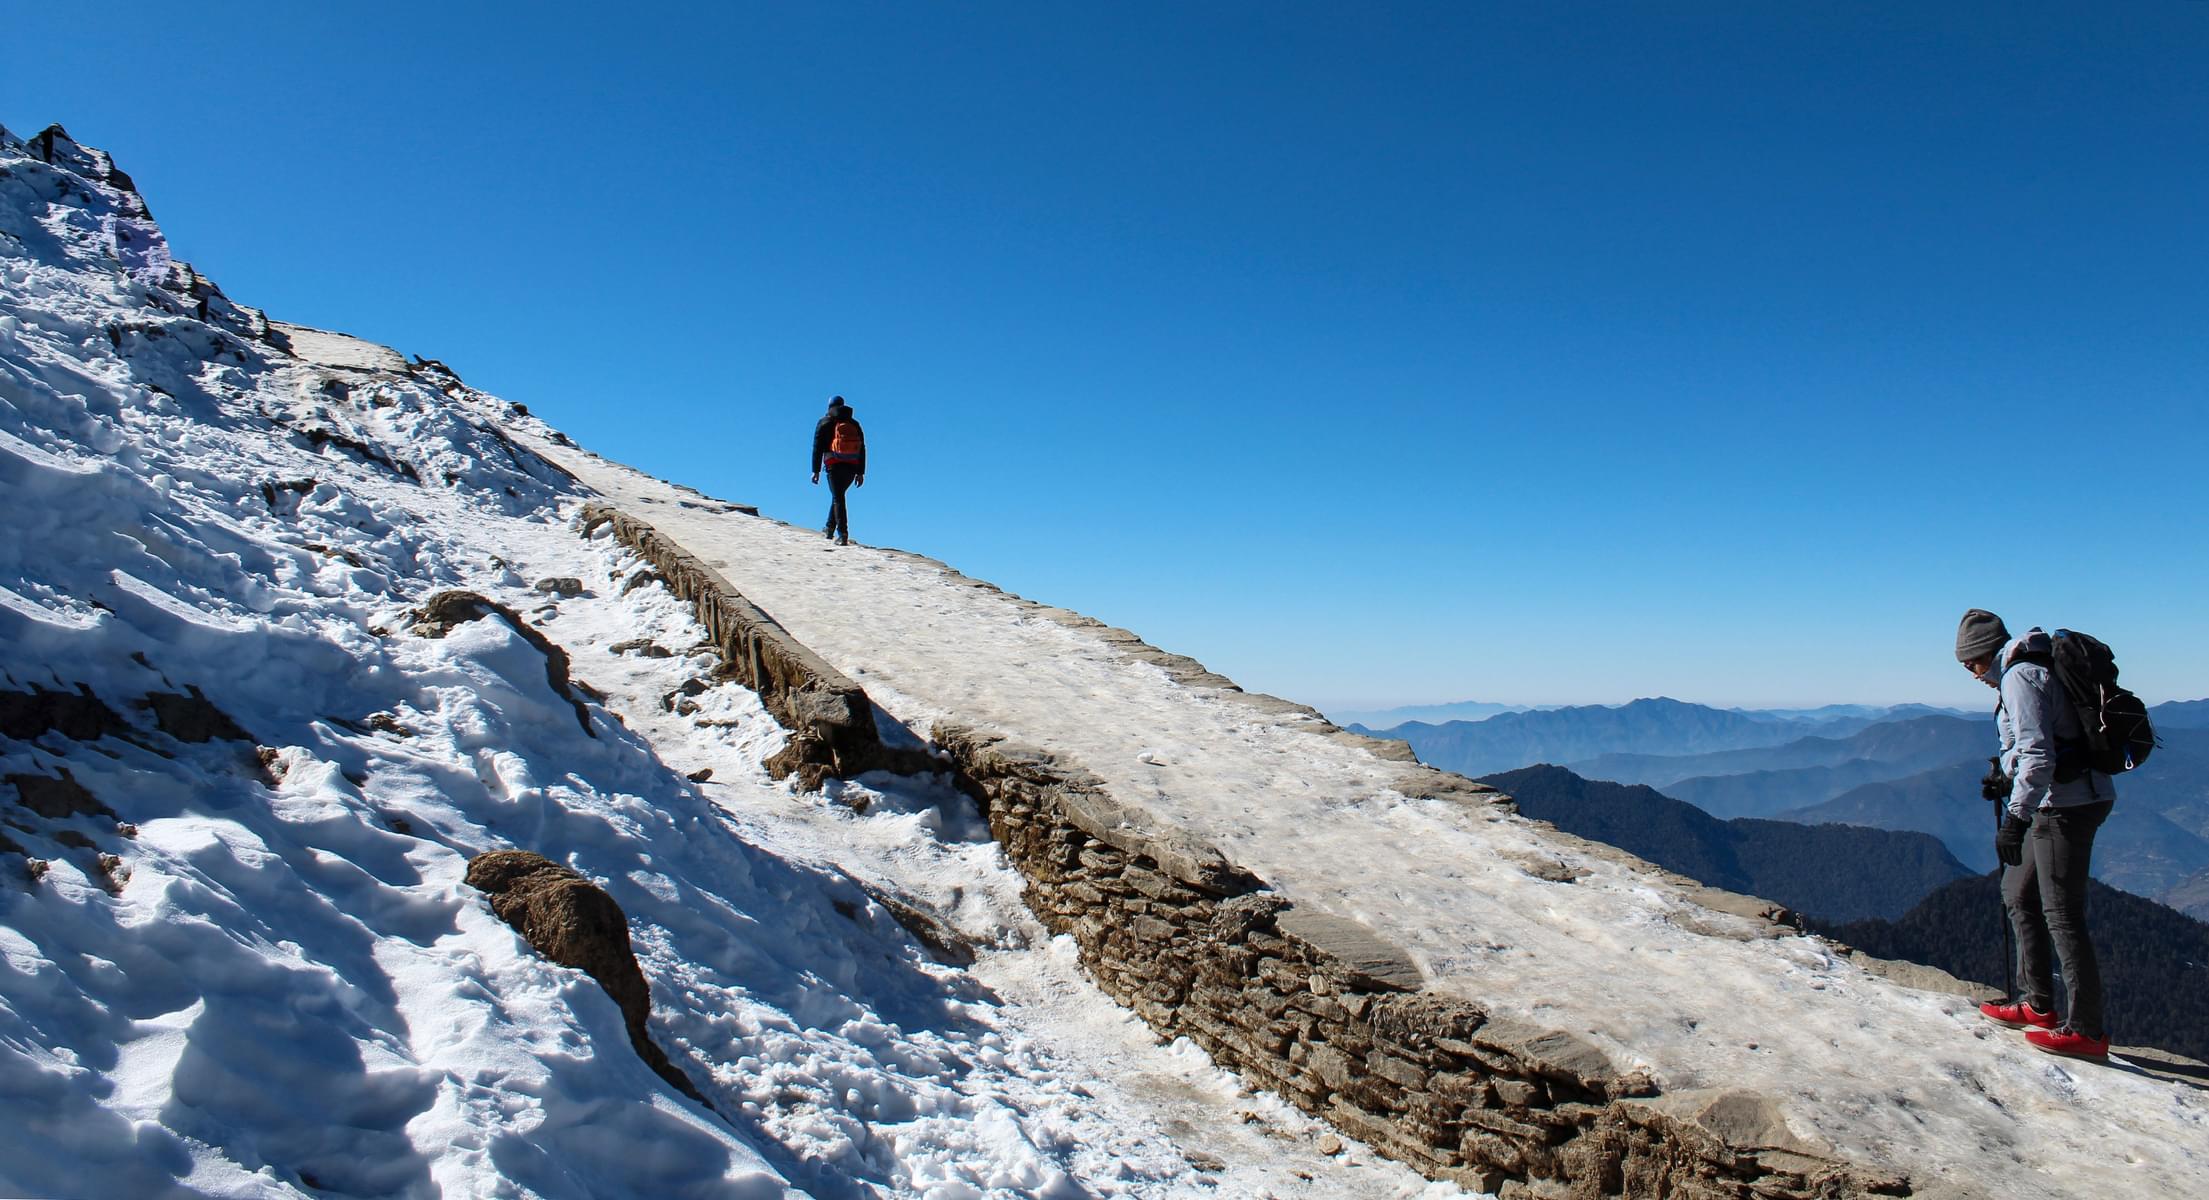 What To Pack for Chopta Tungnath Trek?